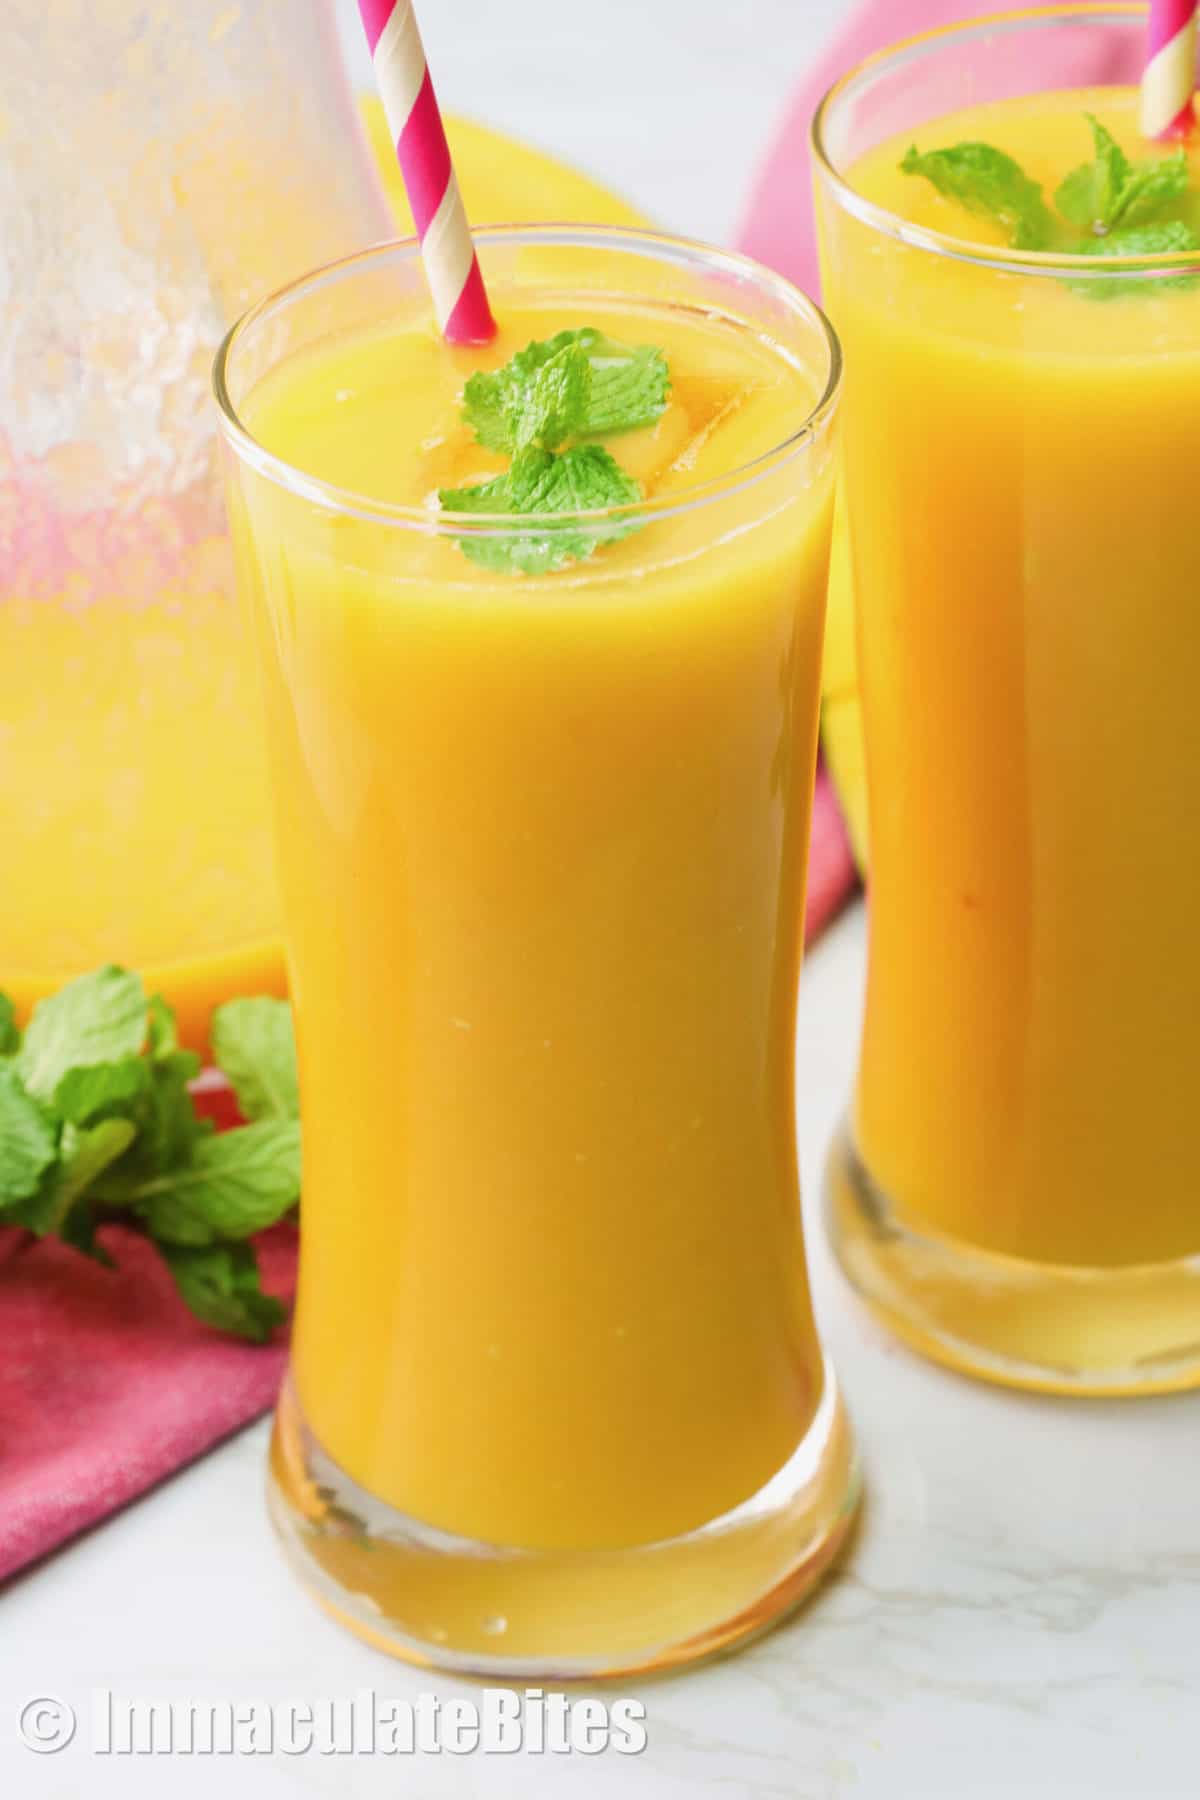 Two glasses of mango juice garnished with mint